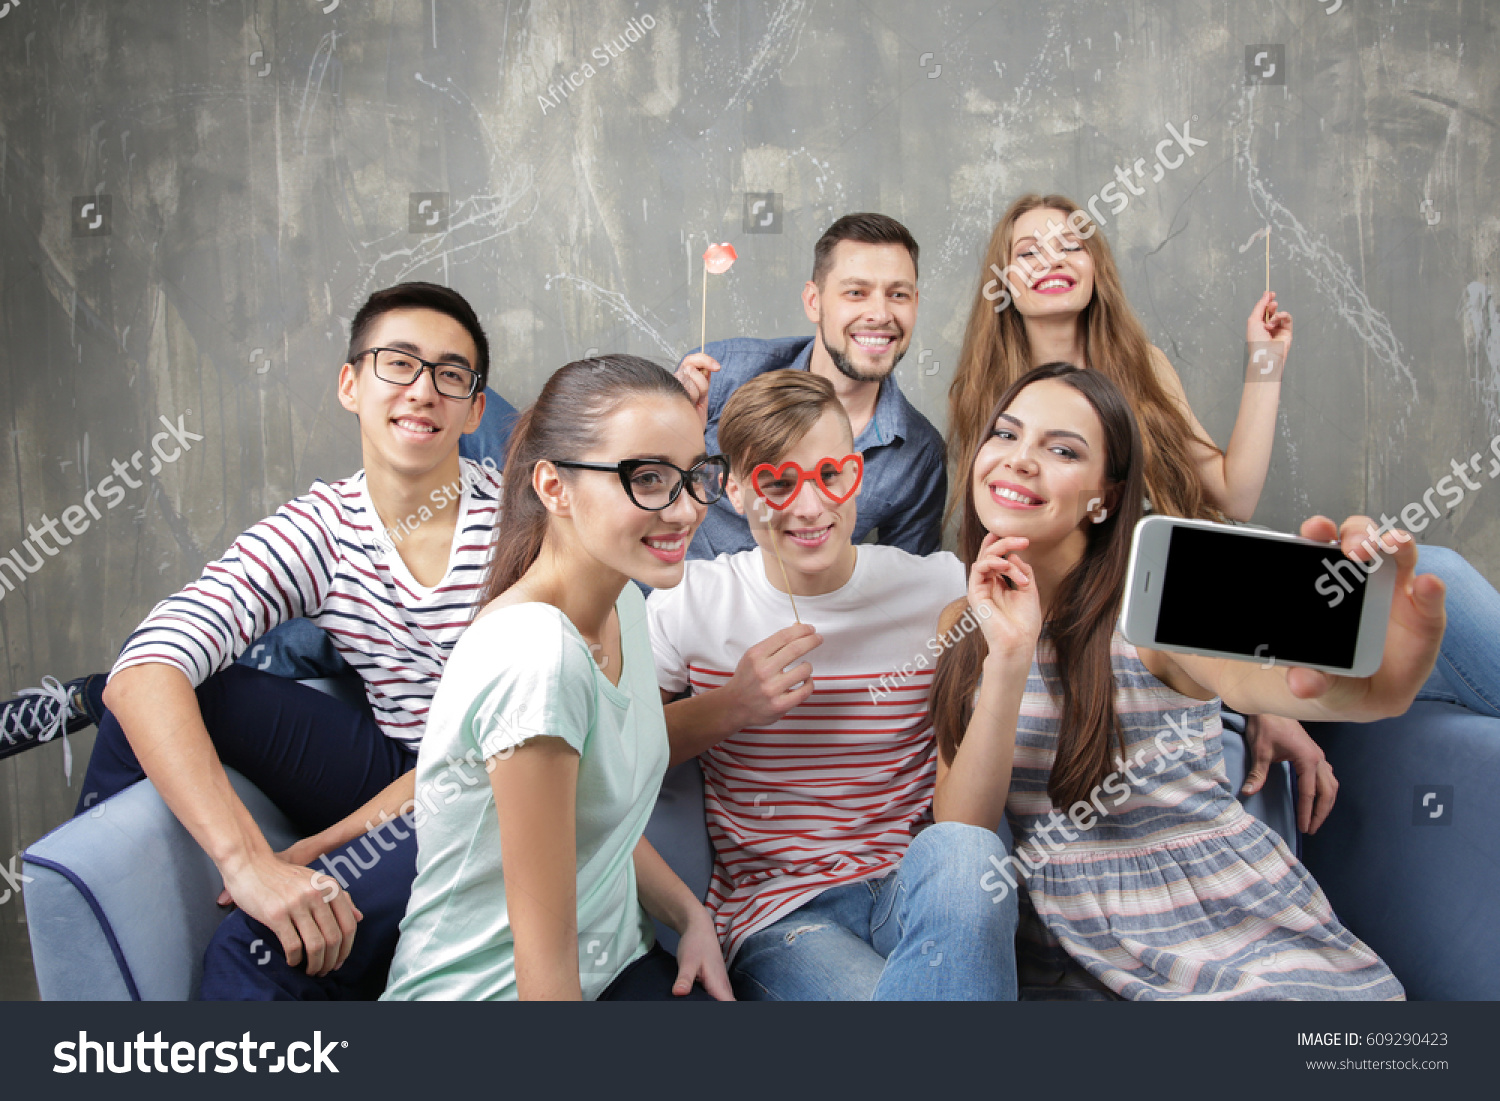 Happy young friends taking selfie while sitting on sofa near grunge wall #609290423